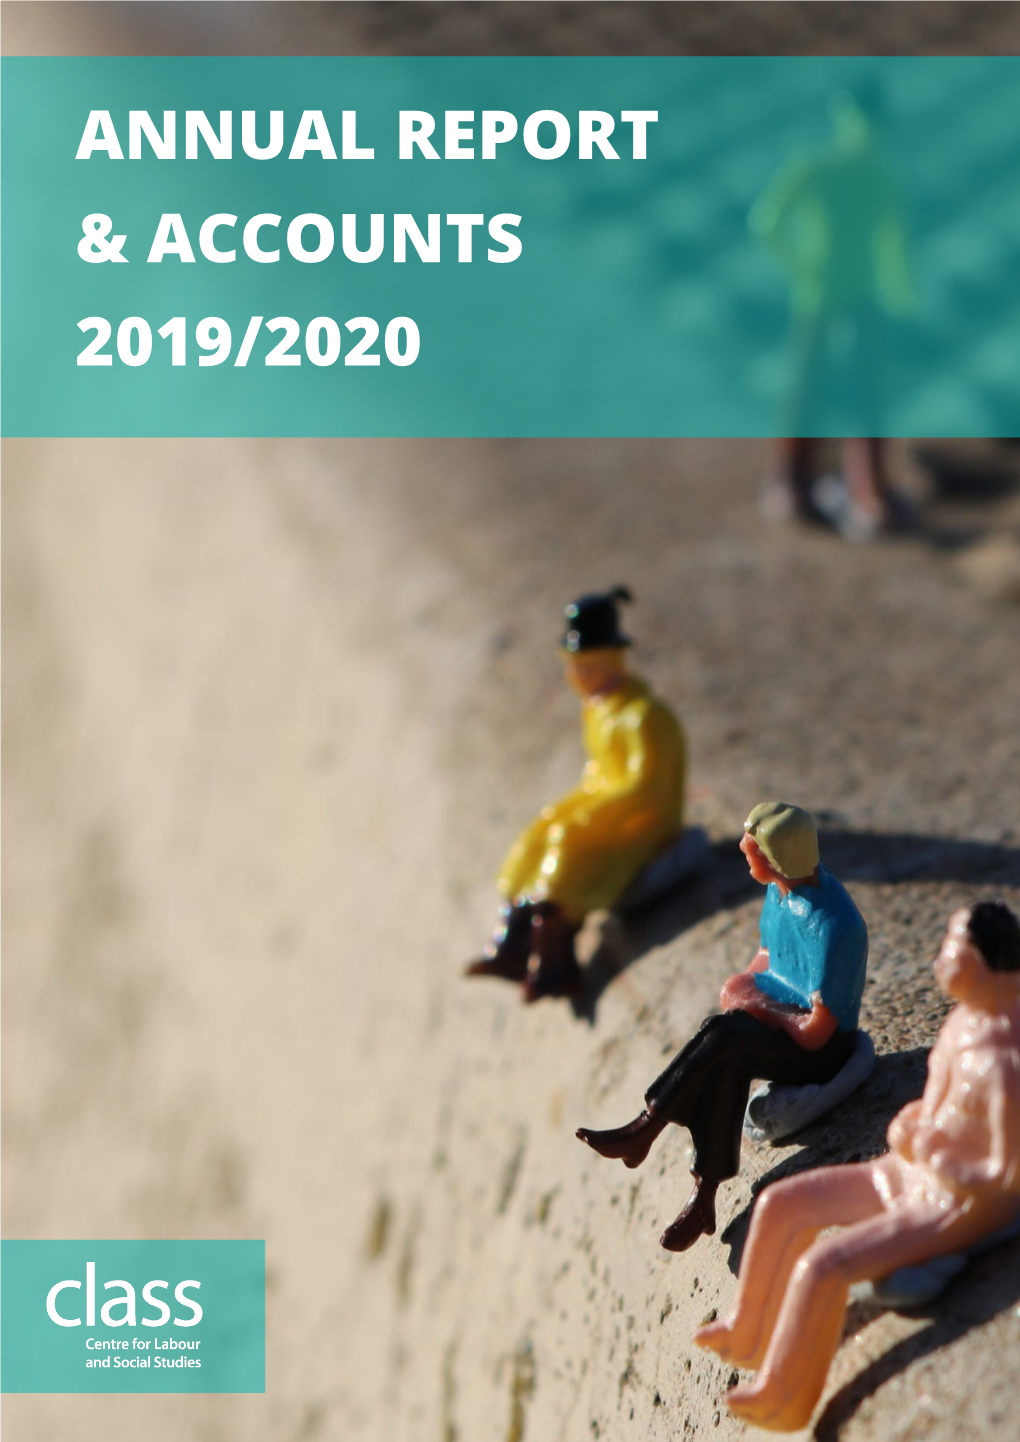 Annual Report & Accounts 2019/2020 Contents